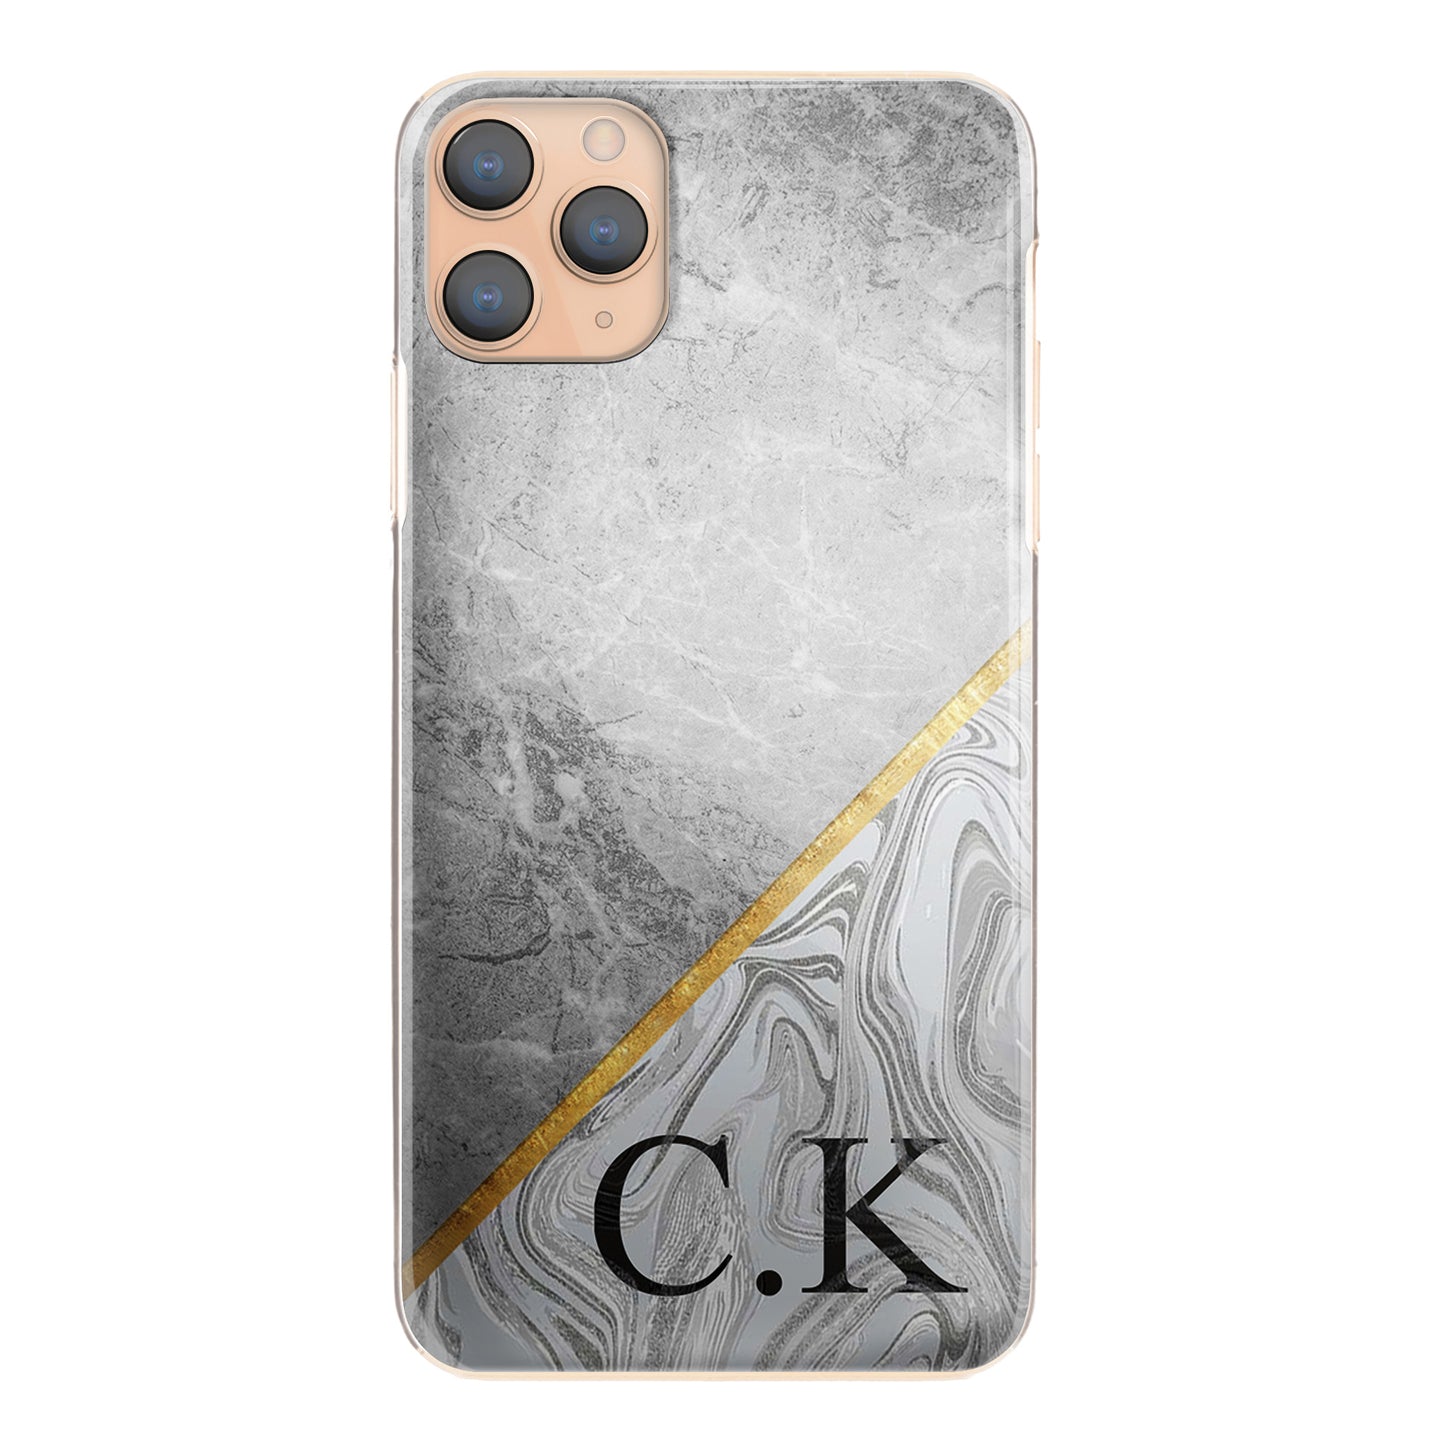 Personalised Motorola Phone Hard Case with Traditional Initials on Stylish Dual Marble